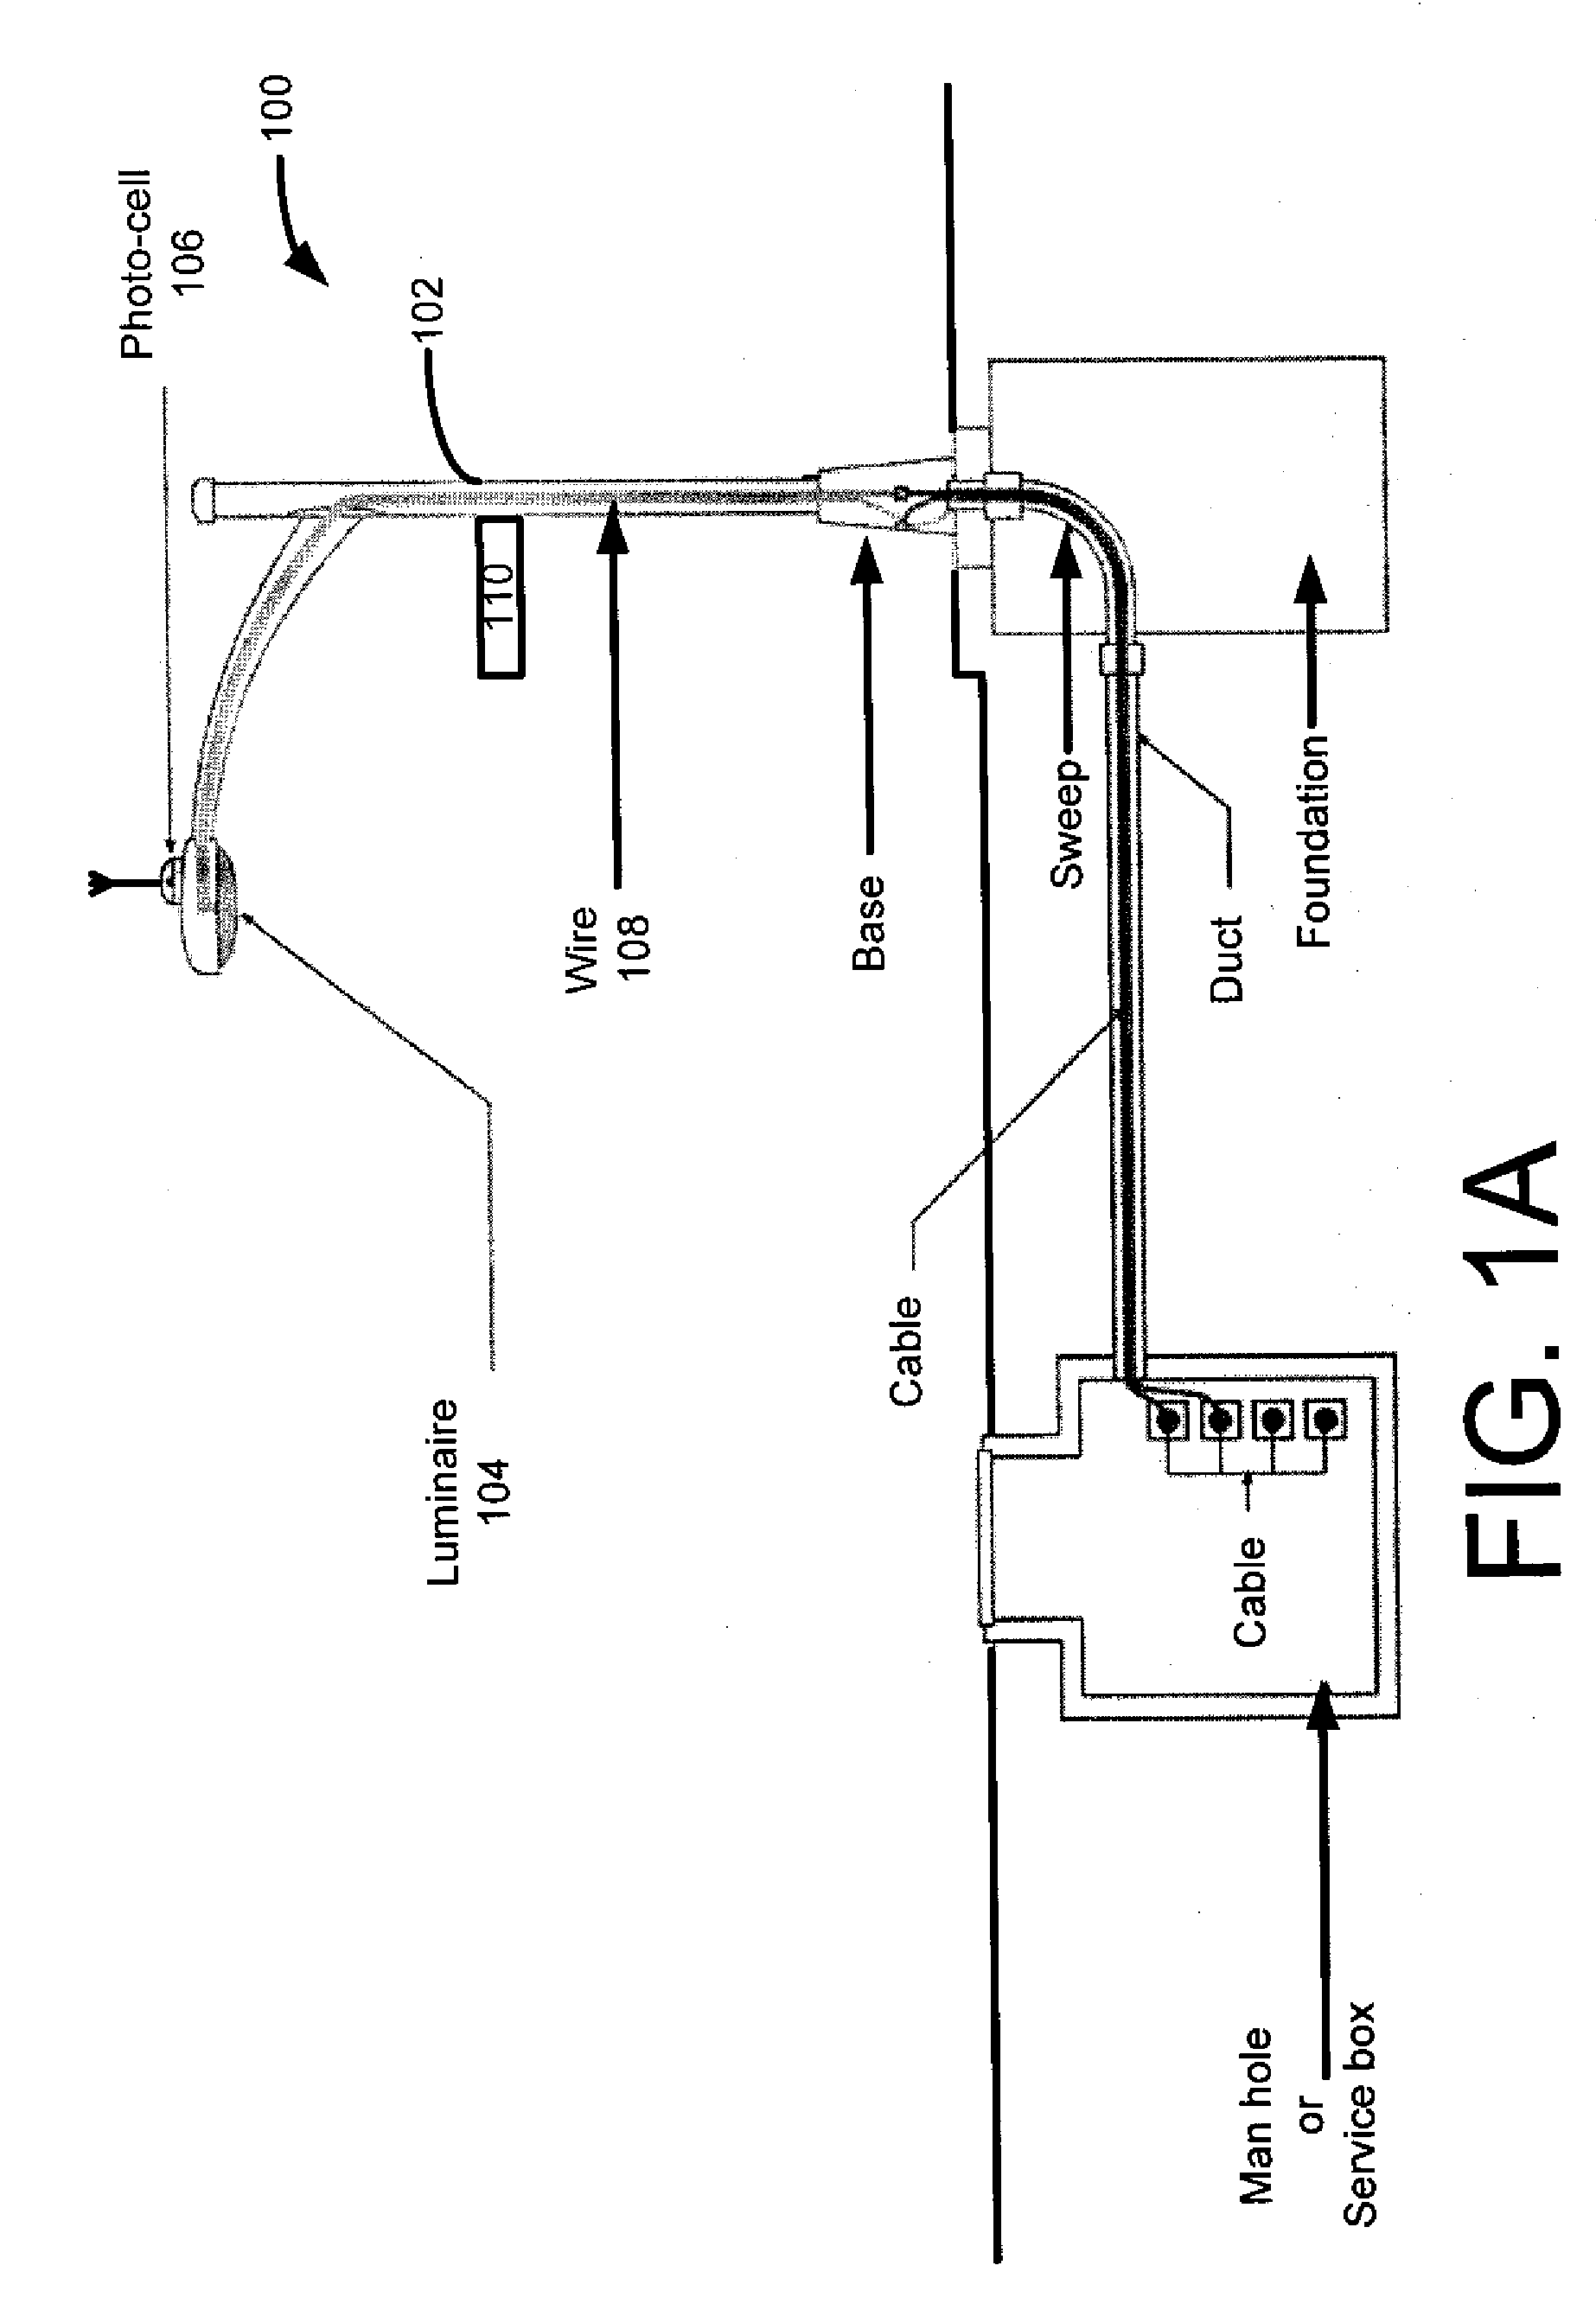 Systems, Methods, and Apparatuses for Stray Voltage Detection